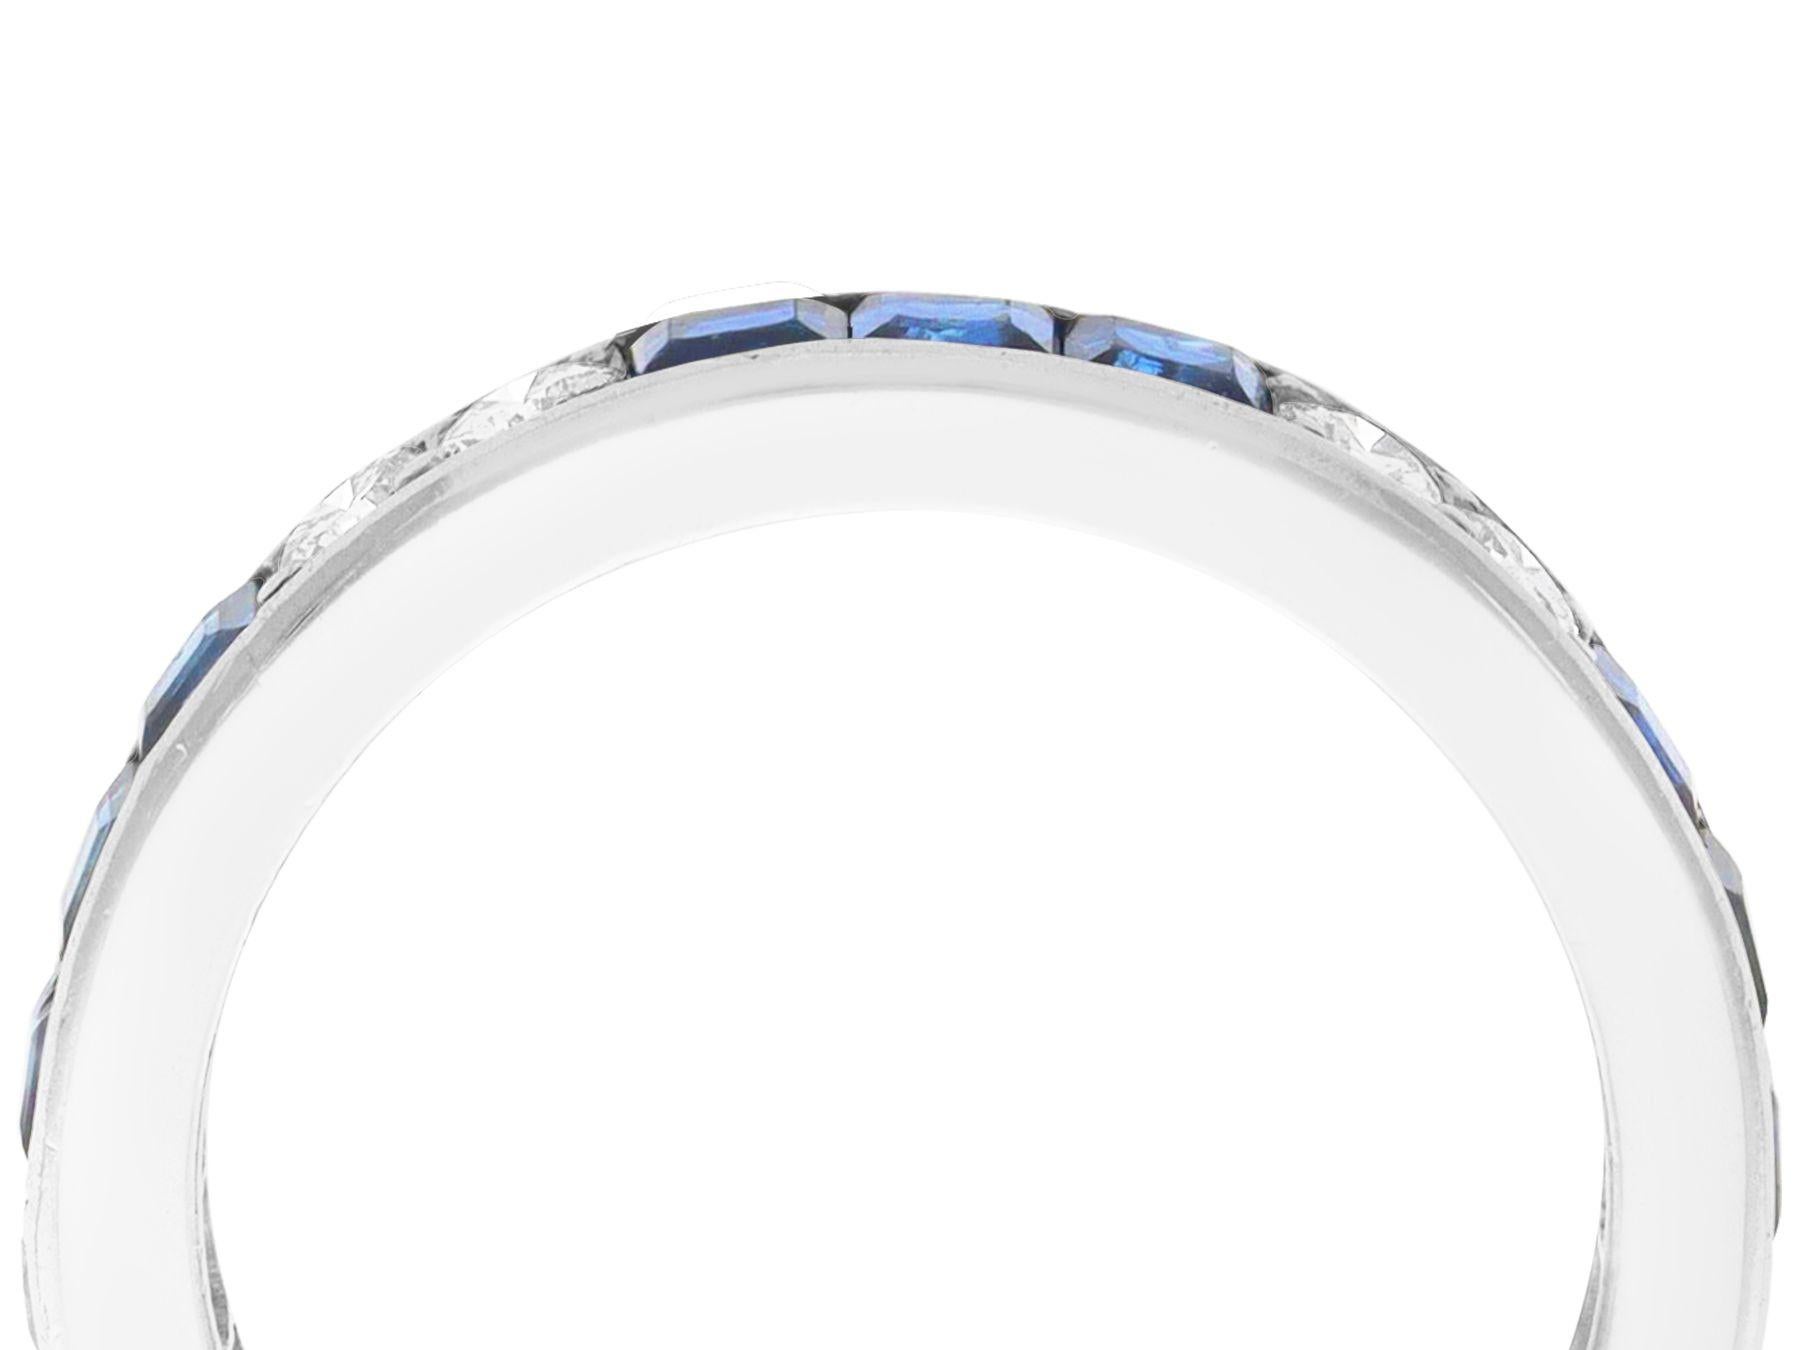 A fine and impressive 1.45 carat sapphire and 0.72 carat diamond, 18 karat white gold eternity ring; part of our diverse vintage jewellery and estate jewelry collections

This impressive vintage eternity ring has been crafted in 18k white